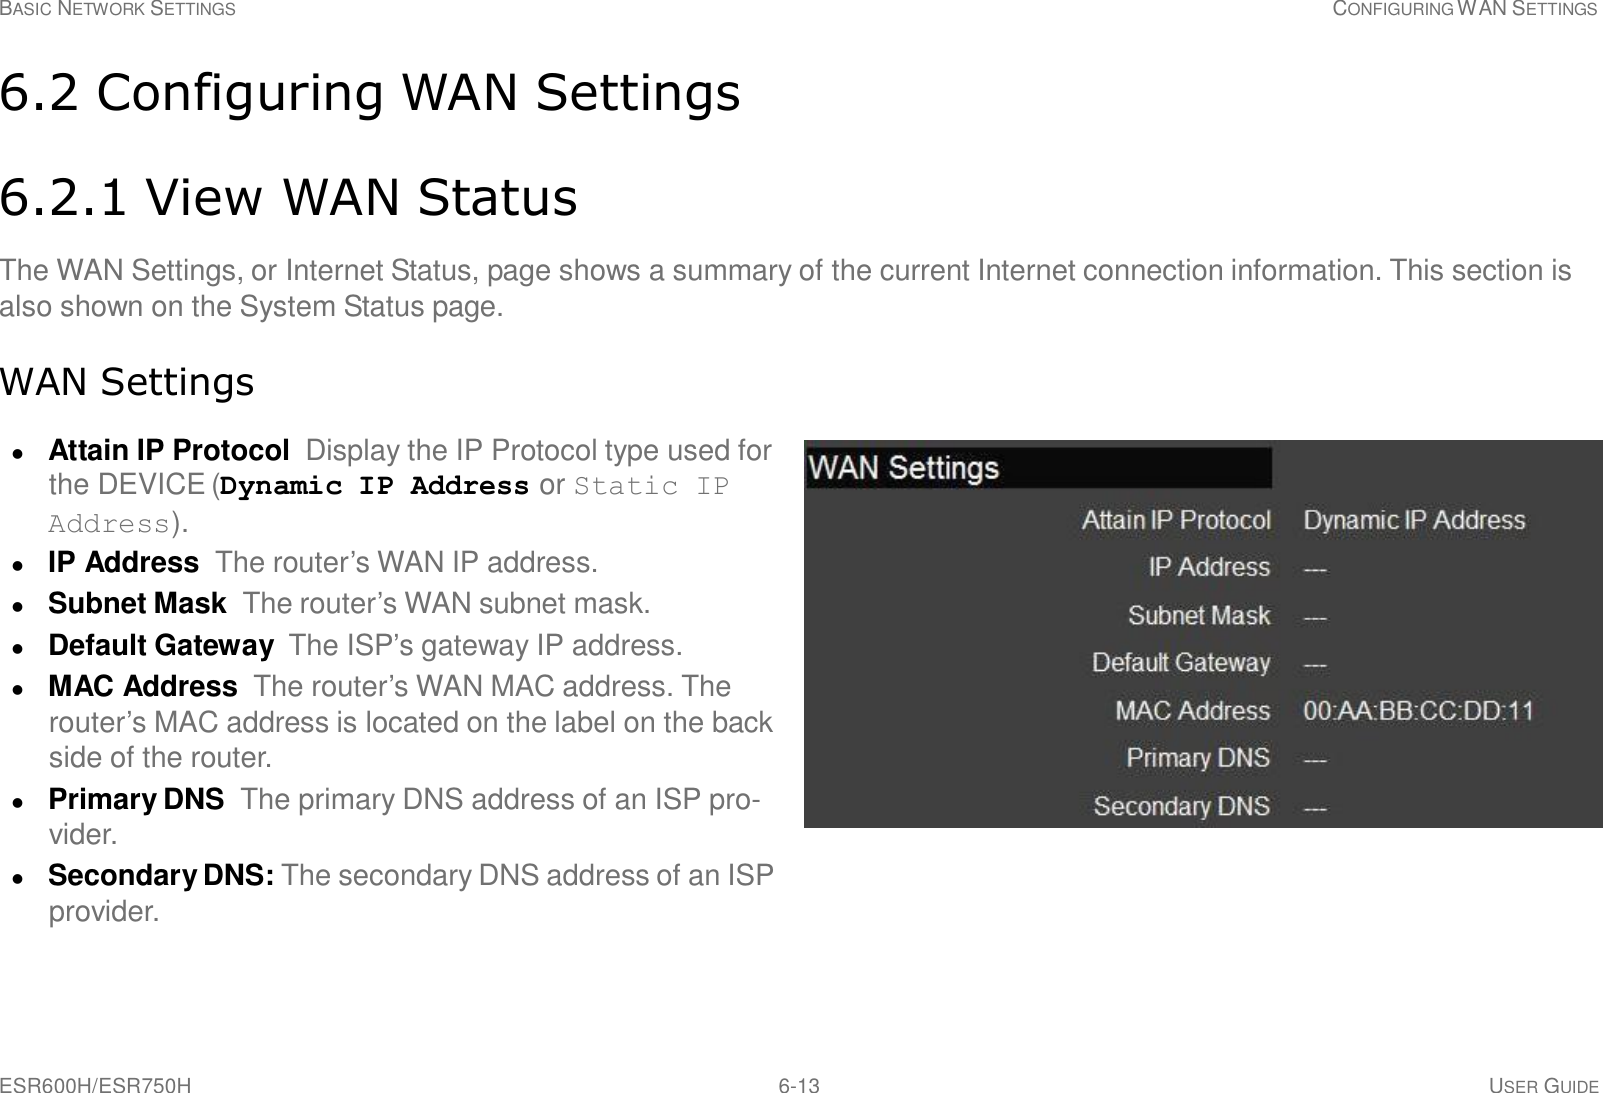 ESR600H/ESR750H 6-13 USER GUIDE BASIC NETWORK SETTINGS CONFIGURING WAN SETTINGS     6.2 Configuring WAN Settings   6.2.1 View WAN Status  The WAN Settings, or Internet Status, page shows a summary of the current Internet connection information. This section is also shown on the System Status page.   WAN Settings   Attain IP Protocol  Display the IP Protocol type used for the DEVICE (Dynamic IP Address or Static IP Address).  IP Address The router’s WAN IP address.  Subnet Mask The router’s WAN subnet mask.  Default Gateway  The ISP’s gateway IP address.  MAC Address The router’s WAN MAC address. The router’s MAC address is located on the label on the back side of the router.  Primary DNS  The primary DNS address of an ISP pro- vider.  Secondary DNS: The secondary DNS address of an ISP provider. 